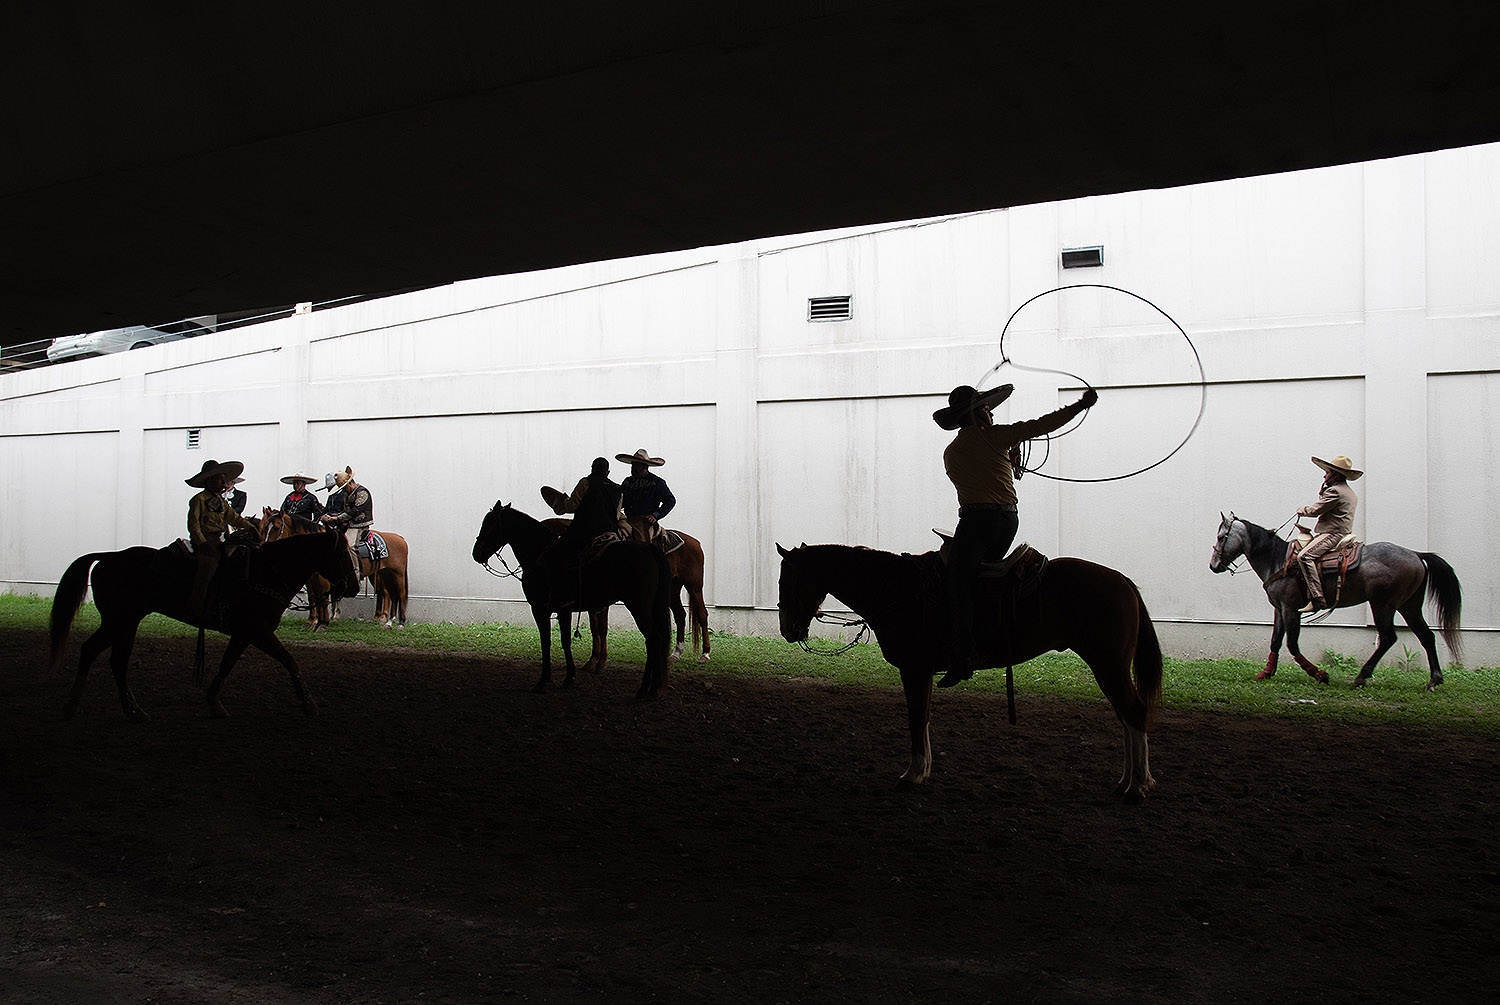 Members of Charros de Bejar practice before the Western Heritage Parade and Cattle Drive Feb. 2 under I-35 at Houston St. <em><b>Photo by V. Finster | Heron</b></em>